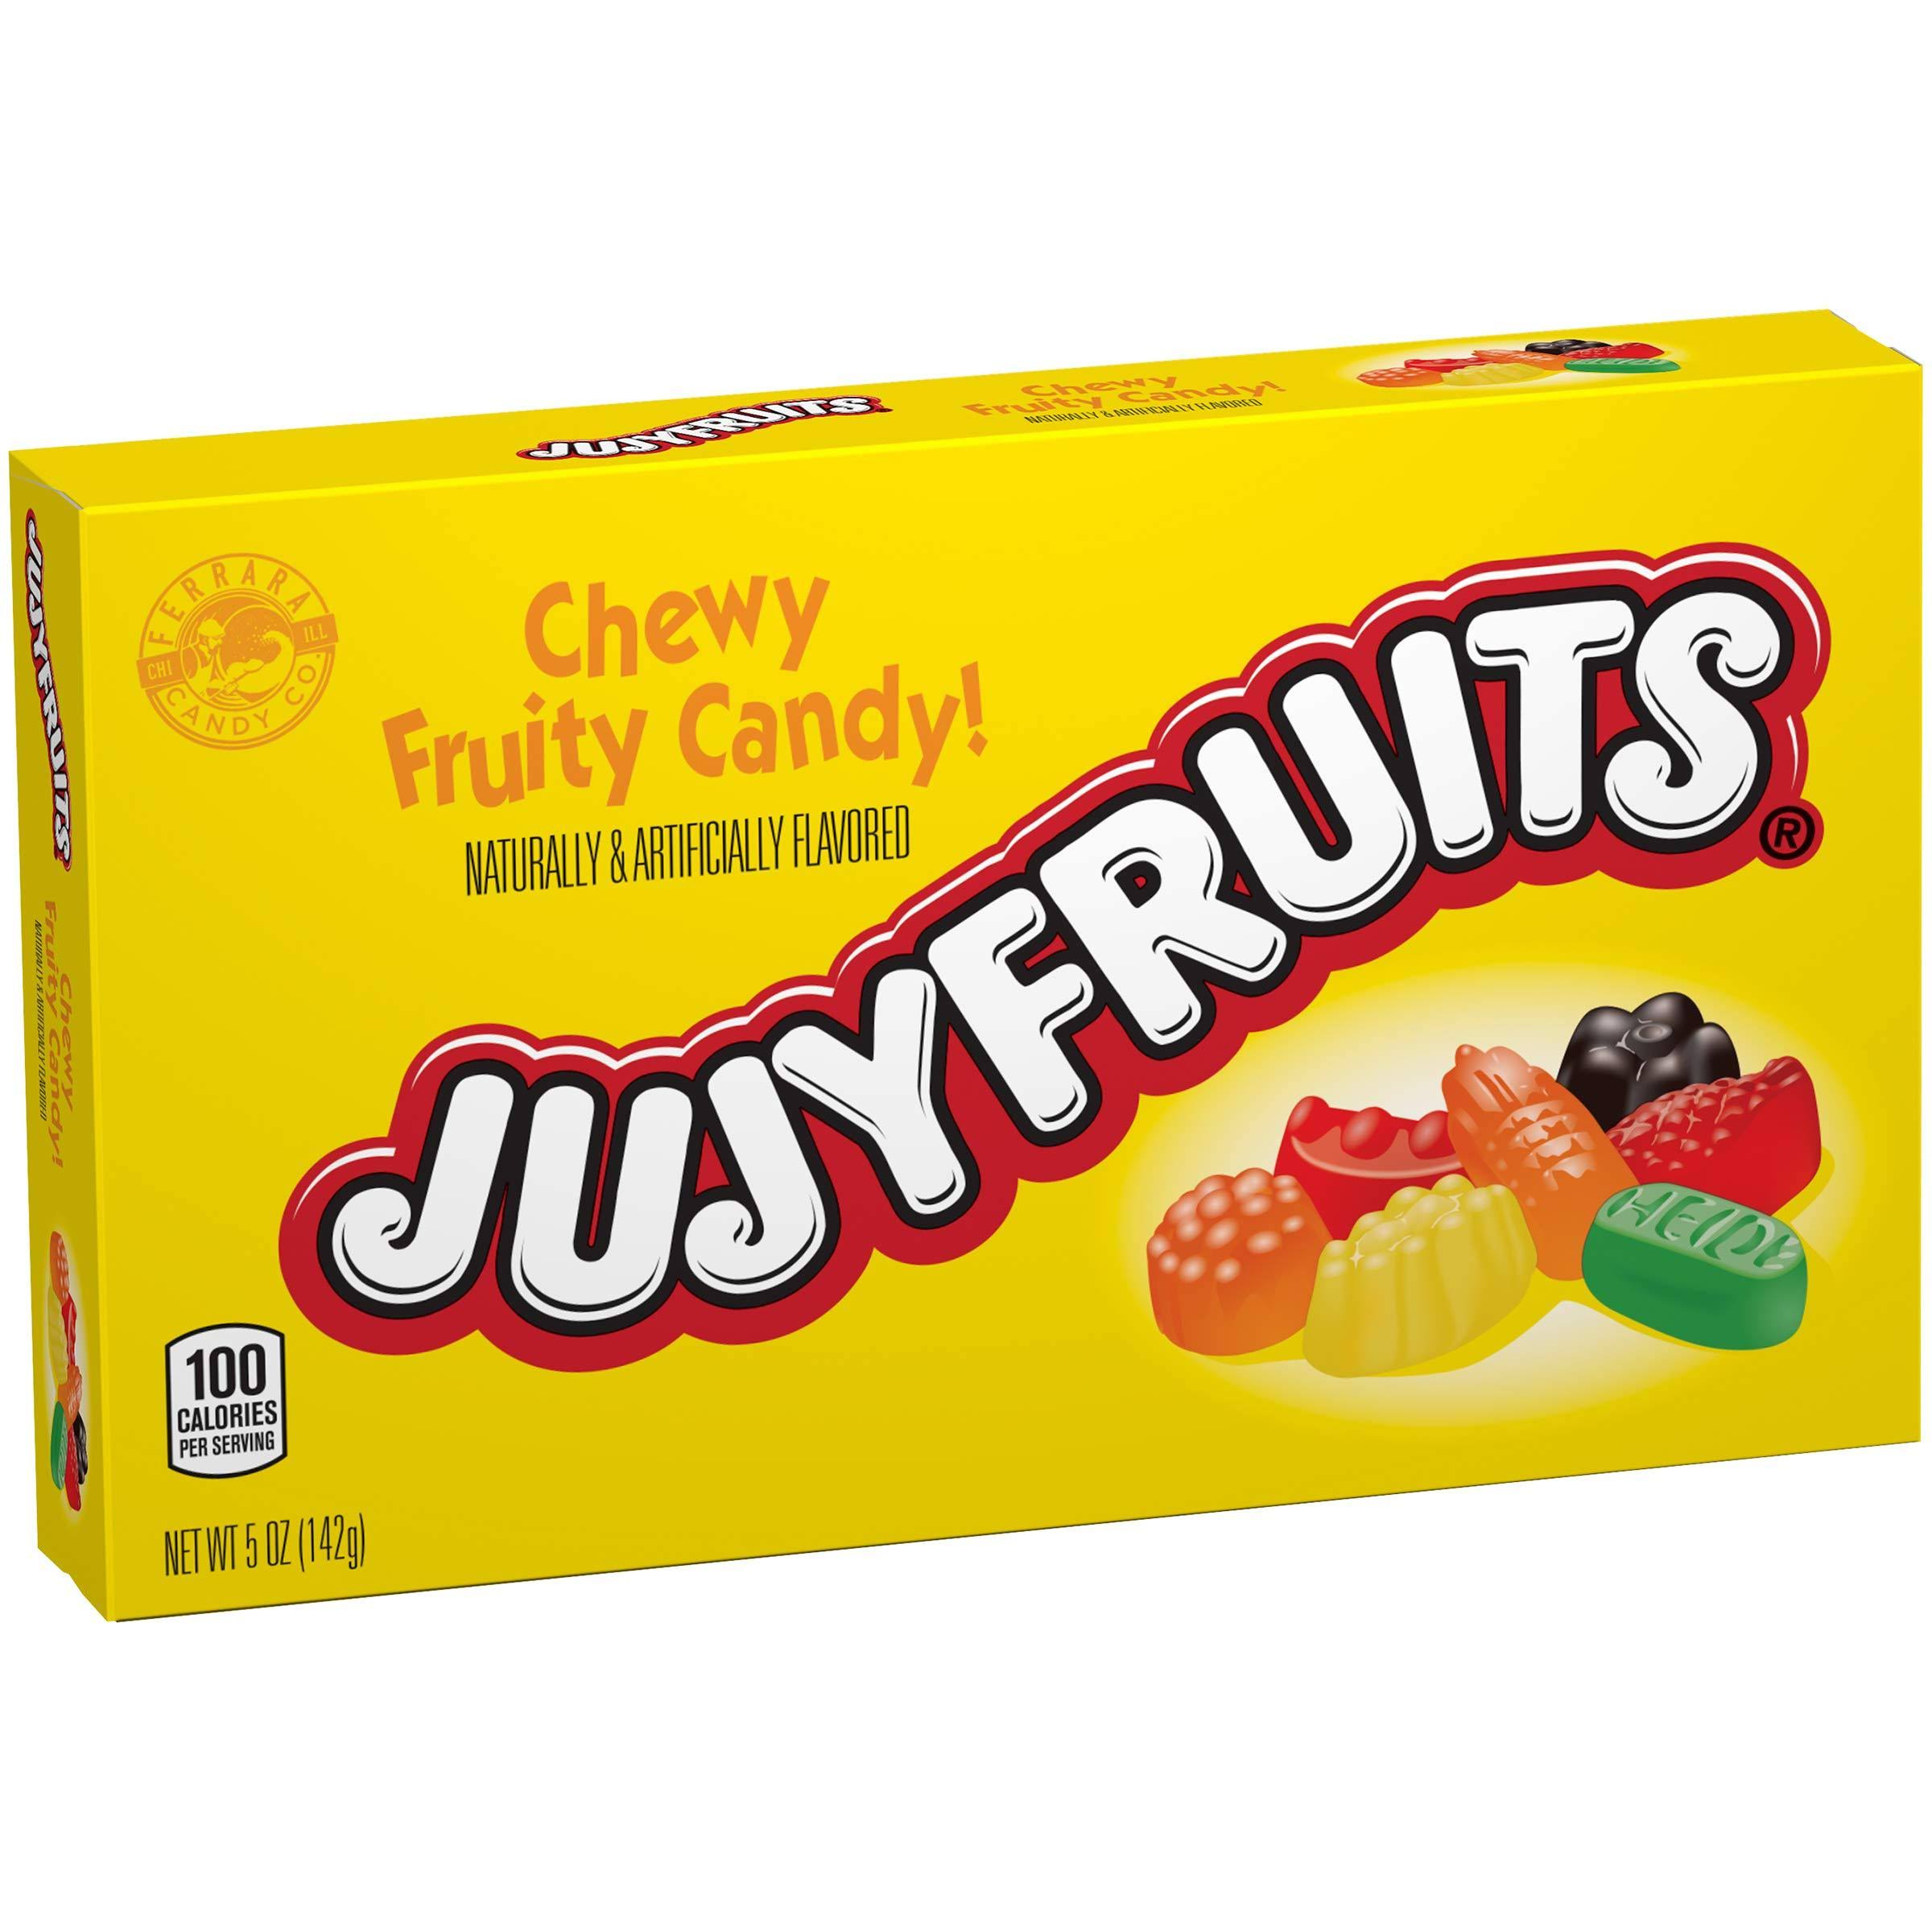 Jujyfruits Chewy Fruity Candy - 5oz